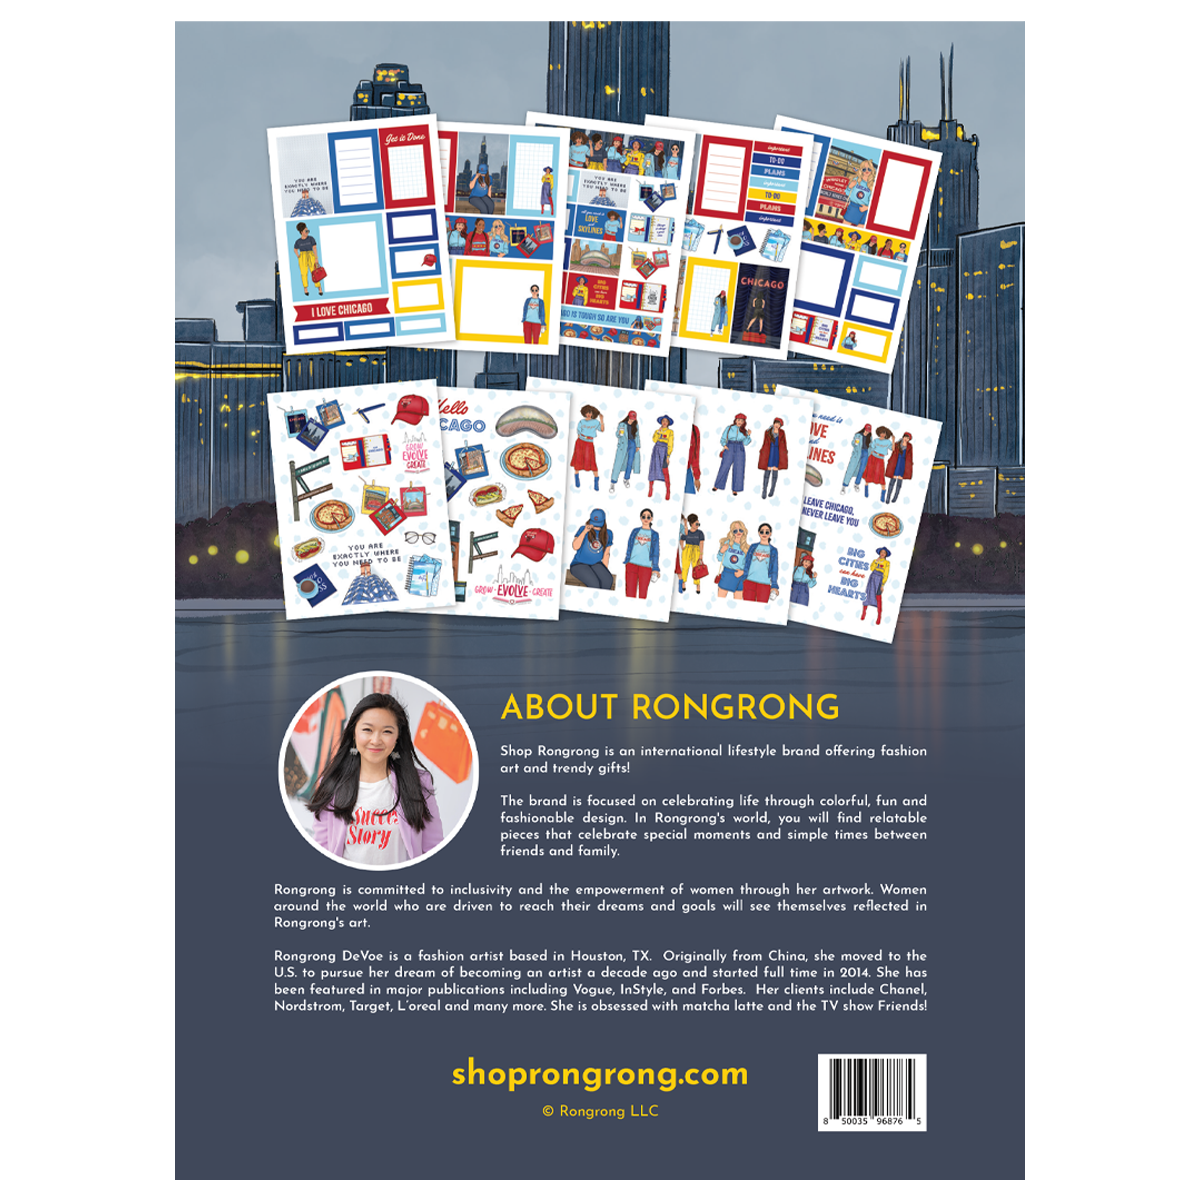 Shop Rongrong Chicago Digital Sticker Pack back cover.